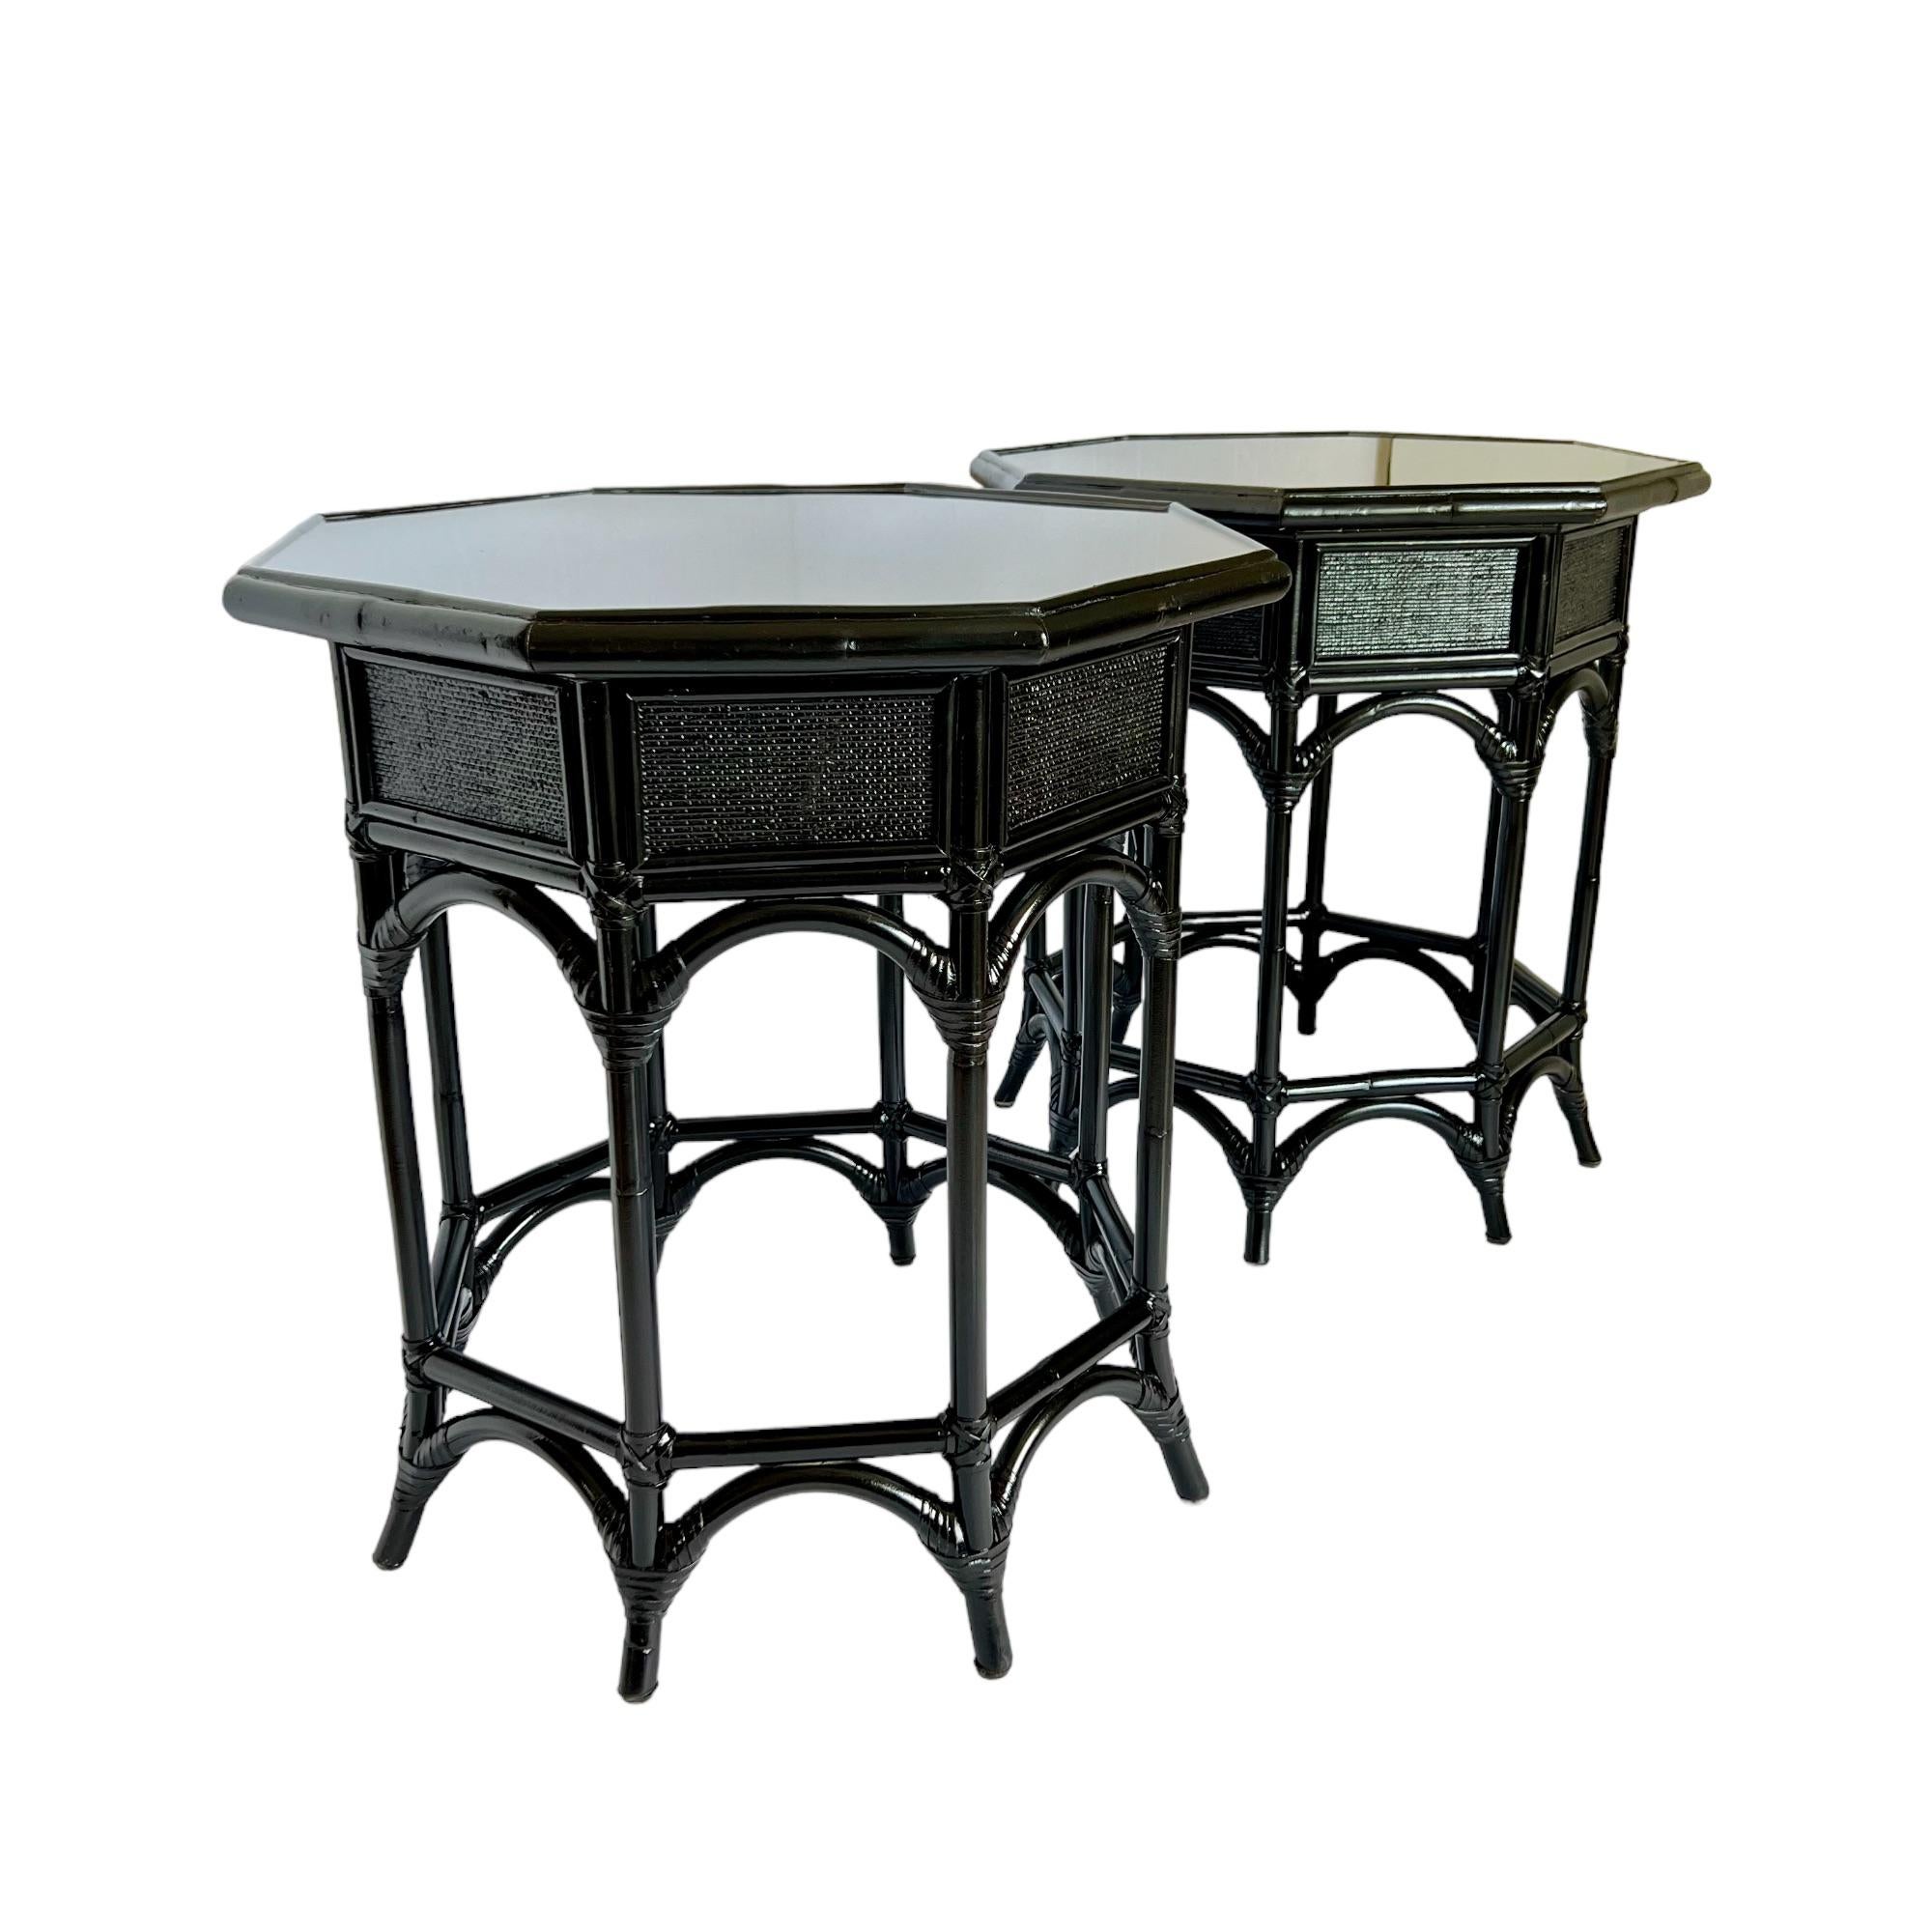 Vintage Refinished Black Rattan Resin Top Octagon Side Tables, a Pair In Good Condition For Sale In Harlingen, TX